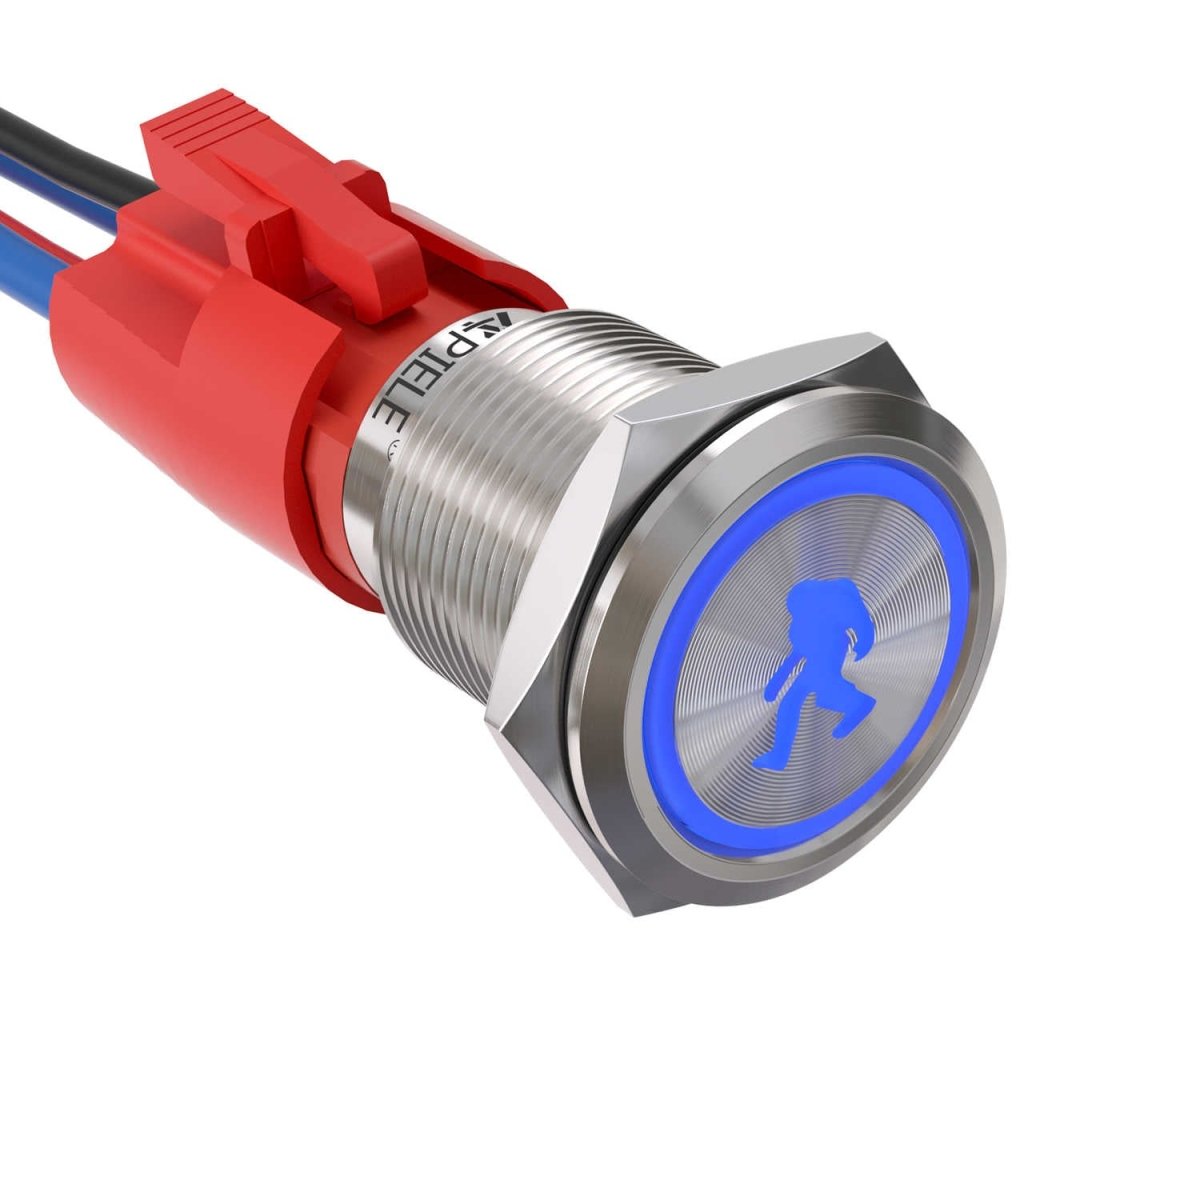 19mm Led LOGO Push Button Switch (To purchase customized products, please contact the official email info@apiele.com) - SASQUTACH-